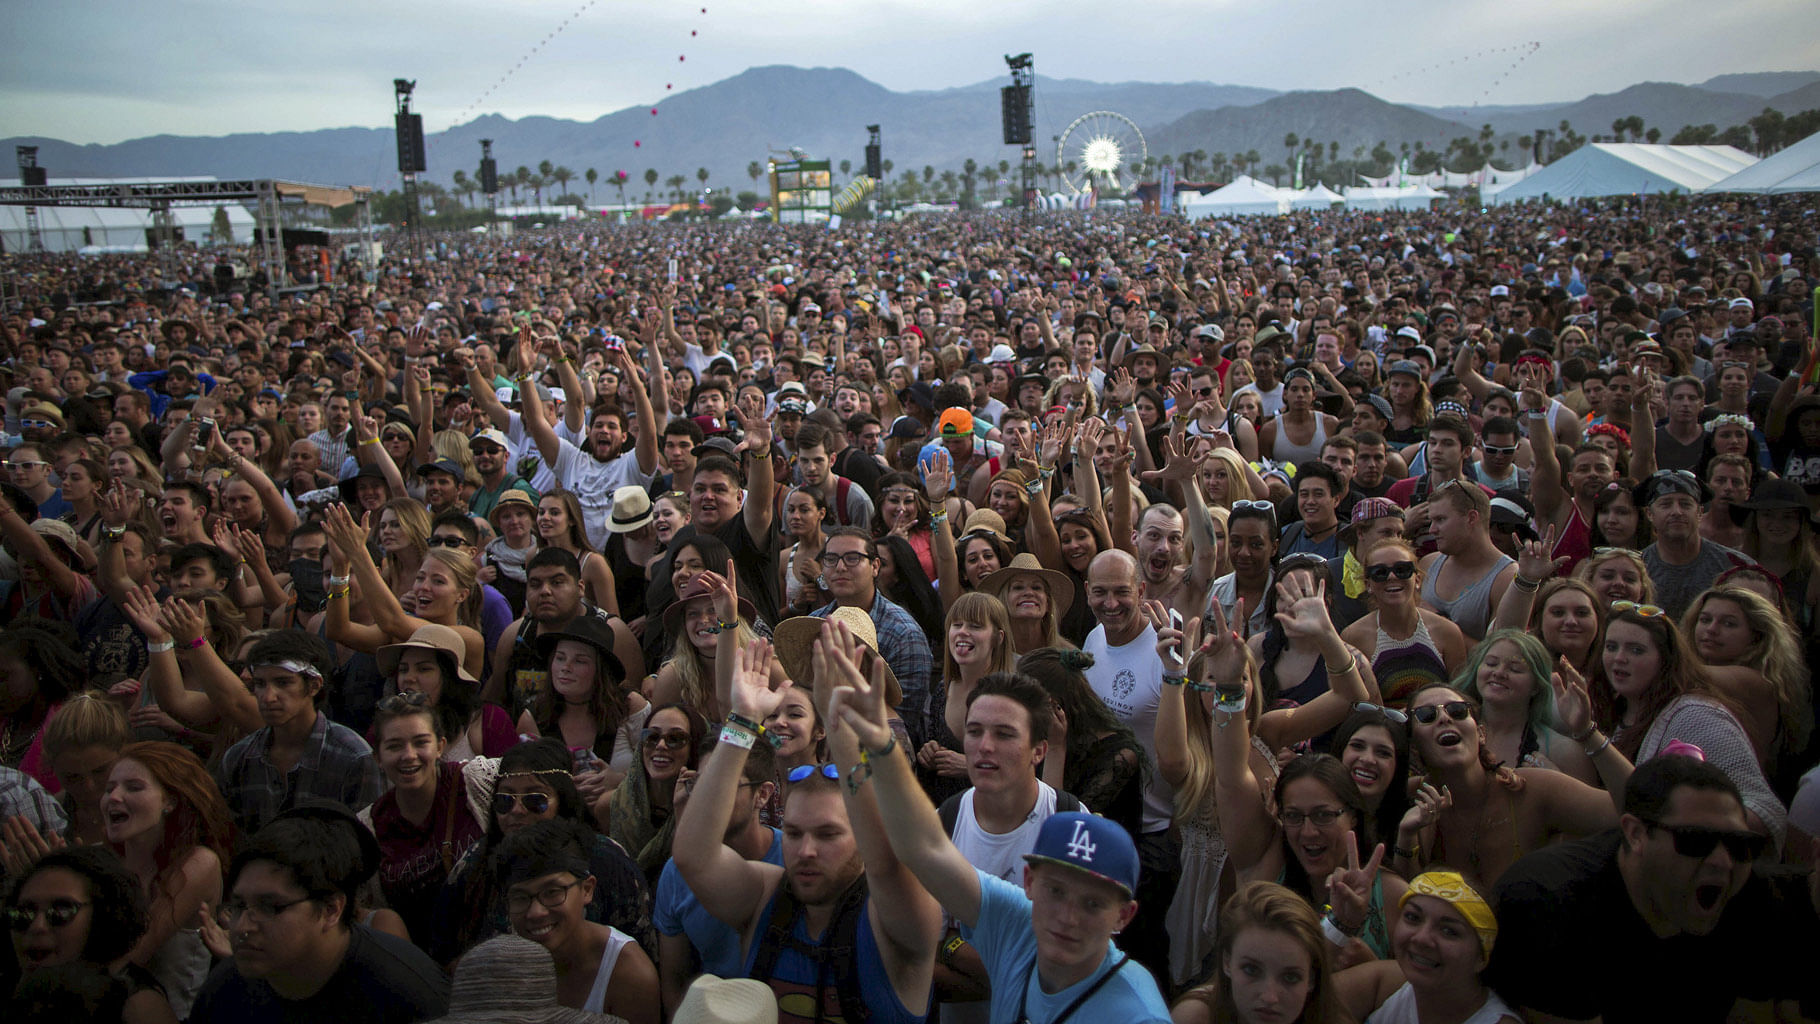 Coachella is an annual music and arts festival held in California. (Photo: Reuters)